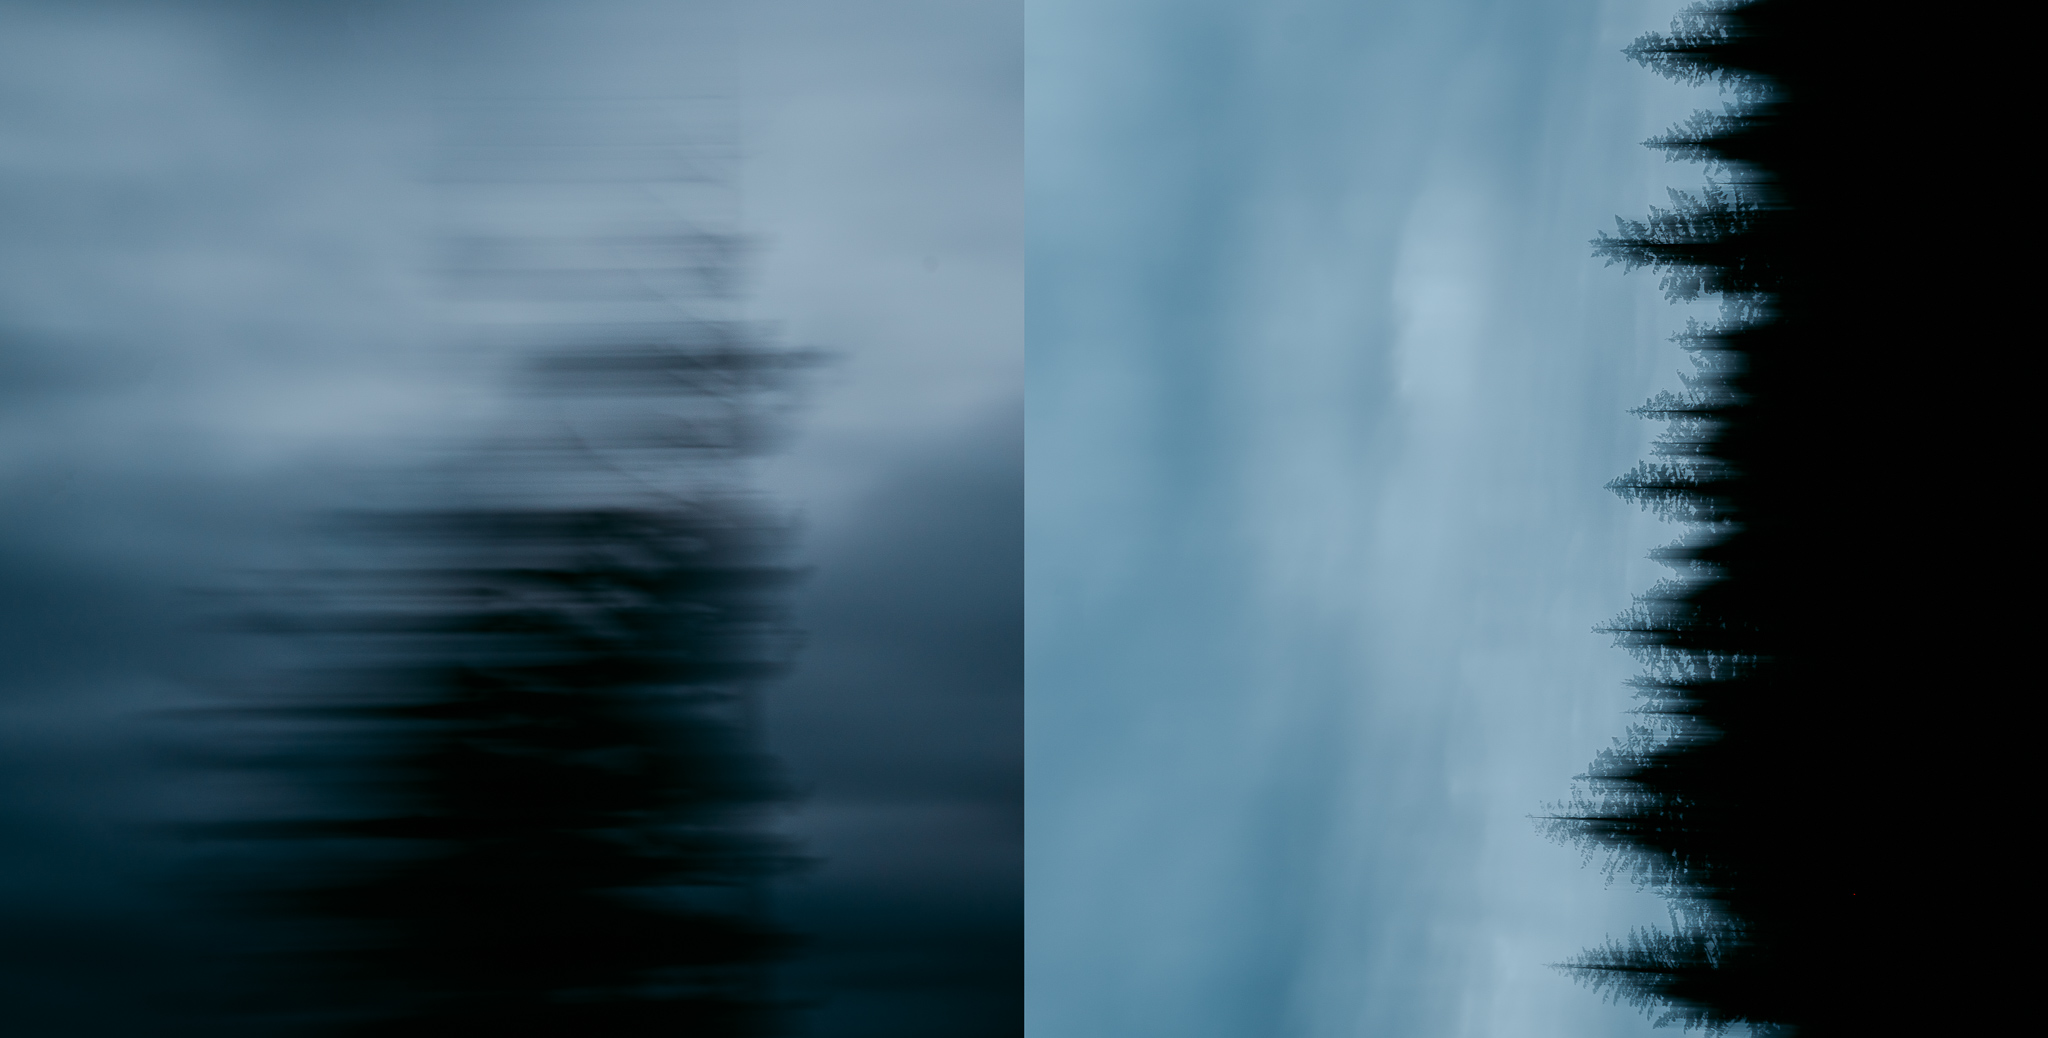 Designing Diptychs - Intentional Movement